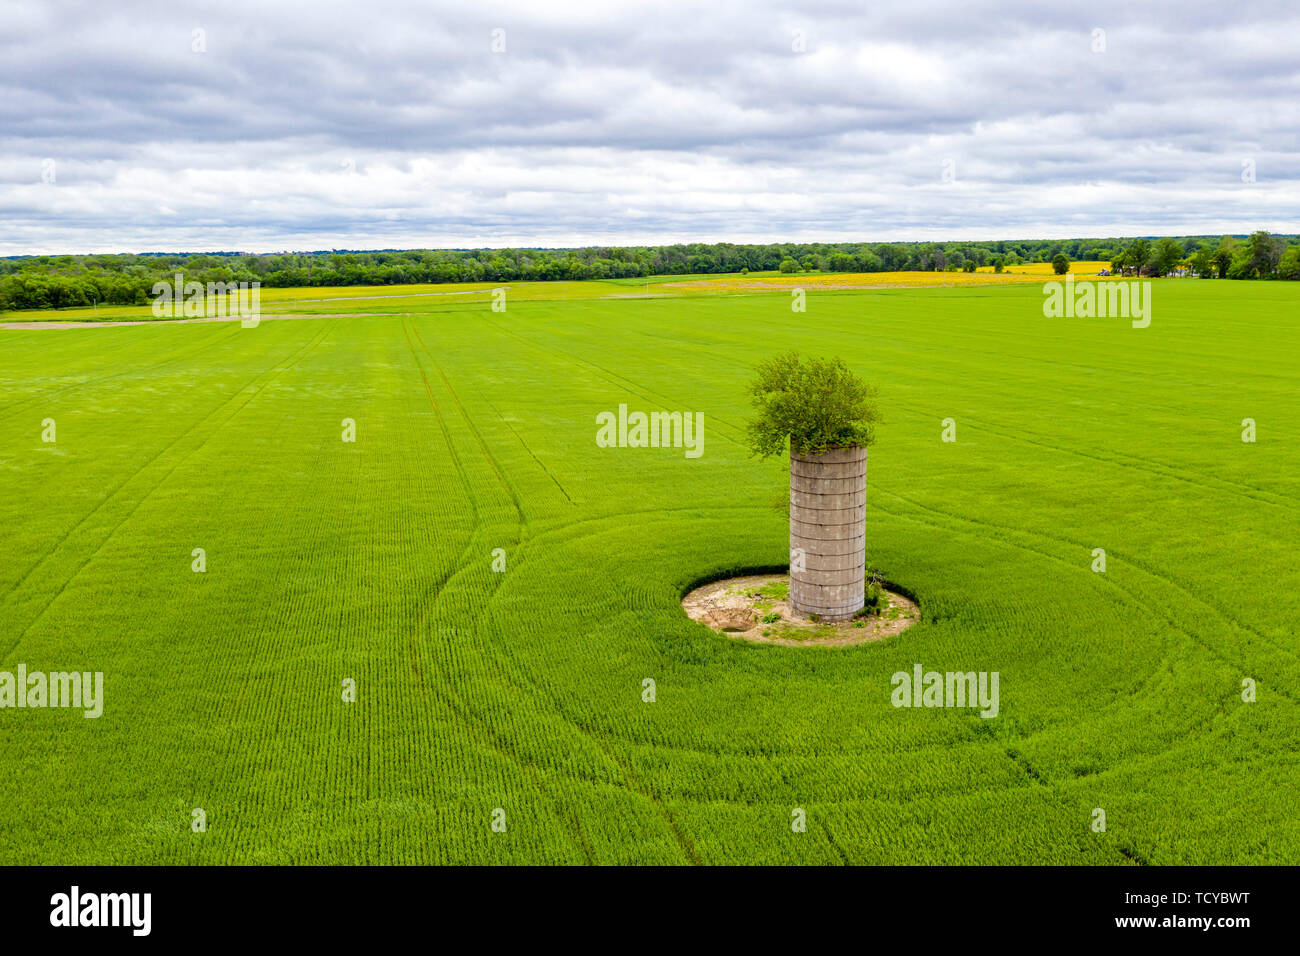 Mt Vernon, Illinois - A tree grows out of the top of an old silo in a farm field. Stock Photo